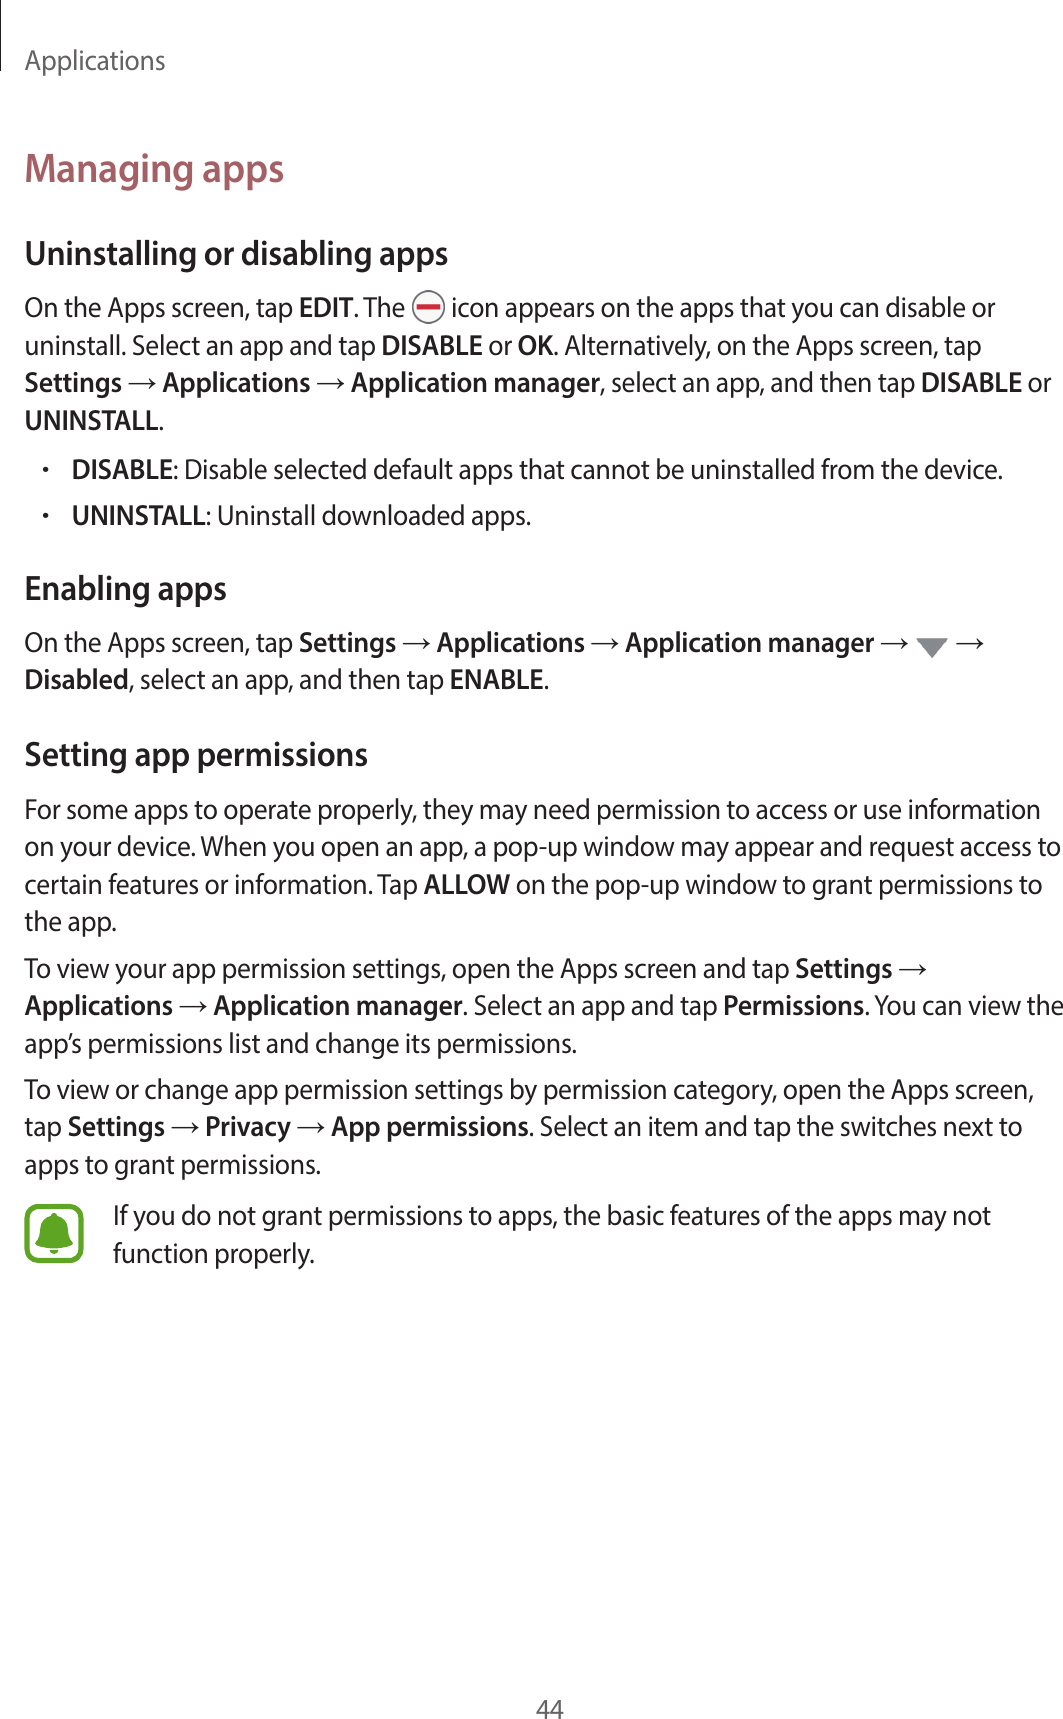 Applications44Managing appsUninstalling or disabling appsOn the Apps screen, tap EDIT. The   icon appears on the apps that you can disable or uninstall. Select an app and tap DISABLE or OK. Alternatively, on the Apps screen, tap Settings → Applications → Application manager, select an app, and then tap DISABLE or UNINSTALL.•DISABLE: Disable selected default apps that cannot be uninstalled from the device.•UNINSTALL: Uninstall downloaded apps.Enabling appsOn the Apps screen, tap Settings → Applications → Application manager →   → Disabled, select an app, and then tap ENABLE.Setting app permissionsFor some apps to operate properly, they may need permission to access or use information on your device. When you open an app, a pop-up window may appear and request access to certain features or information. Tap ALLOW on the pop-up window to grant permissions to the app.To view your app permission settings, open the Apps screen and tap Settings → Applications → Application manager. Select an app and tap Permissions. You can view the app’s permissions list and change its permissions.To view or change app permission settings by permission category, open the Apps screen, tap Settings → Privacy → App permissions. Select an item and tap the switches next to apps to grant permissions.If you do not grant permissions to apps, the basic features of the apps may not function properly.